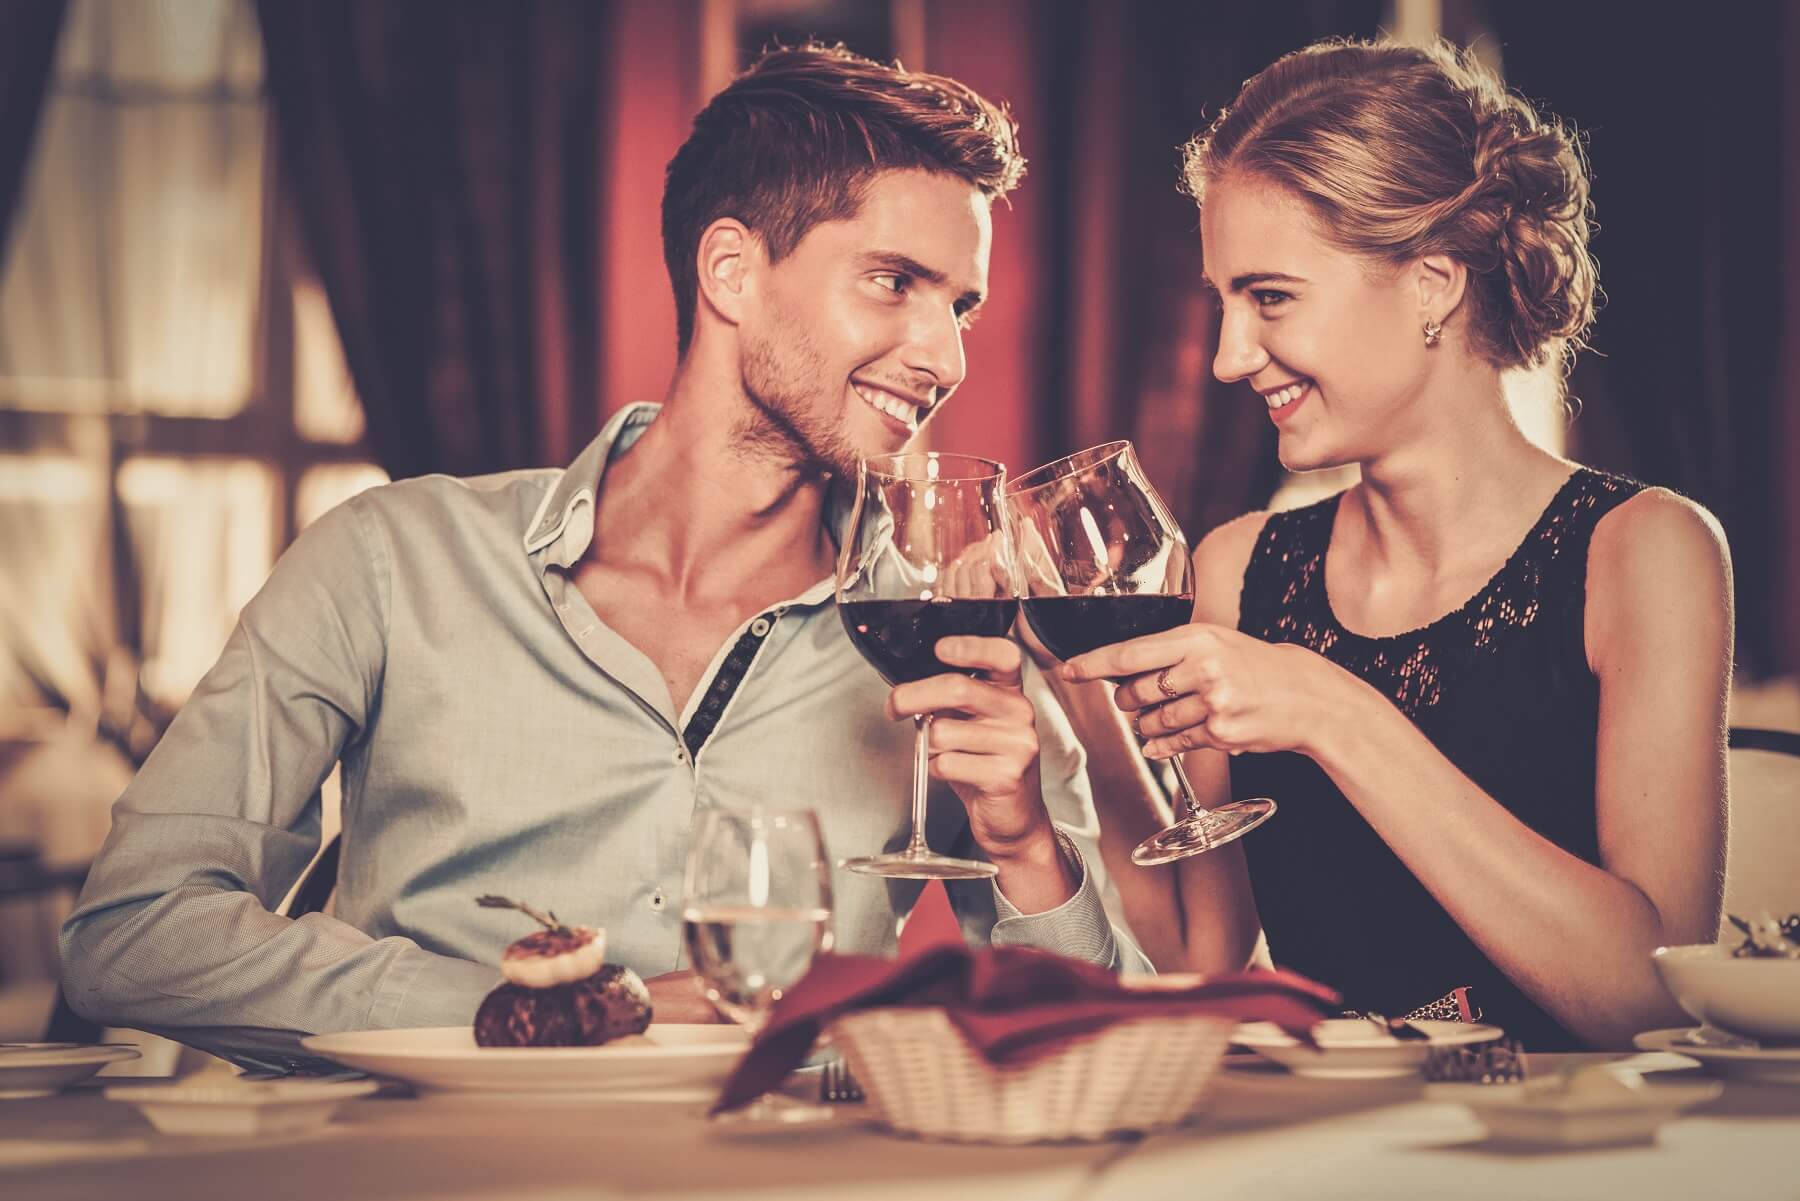 How Compatible Are We? Couple Romantic Restaurant Date Drinking